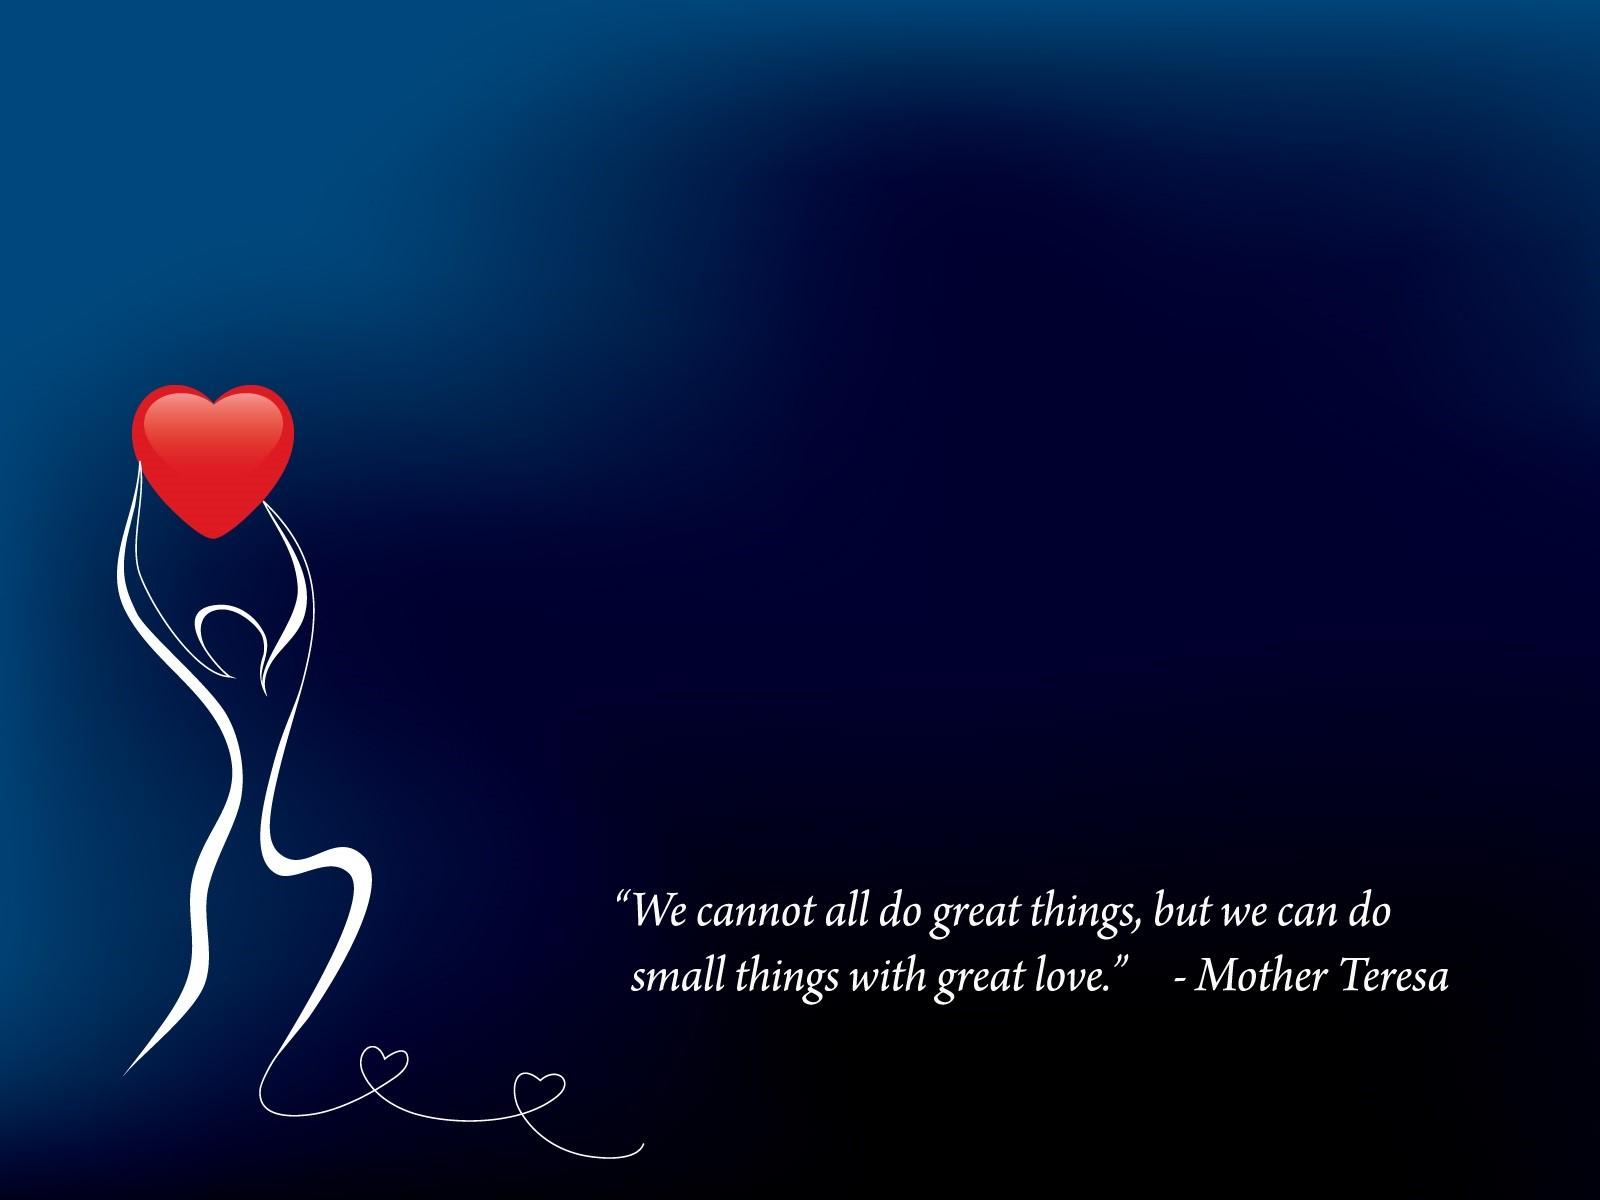 Mother Teresa Latest Quotes on Love Image